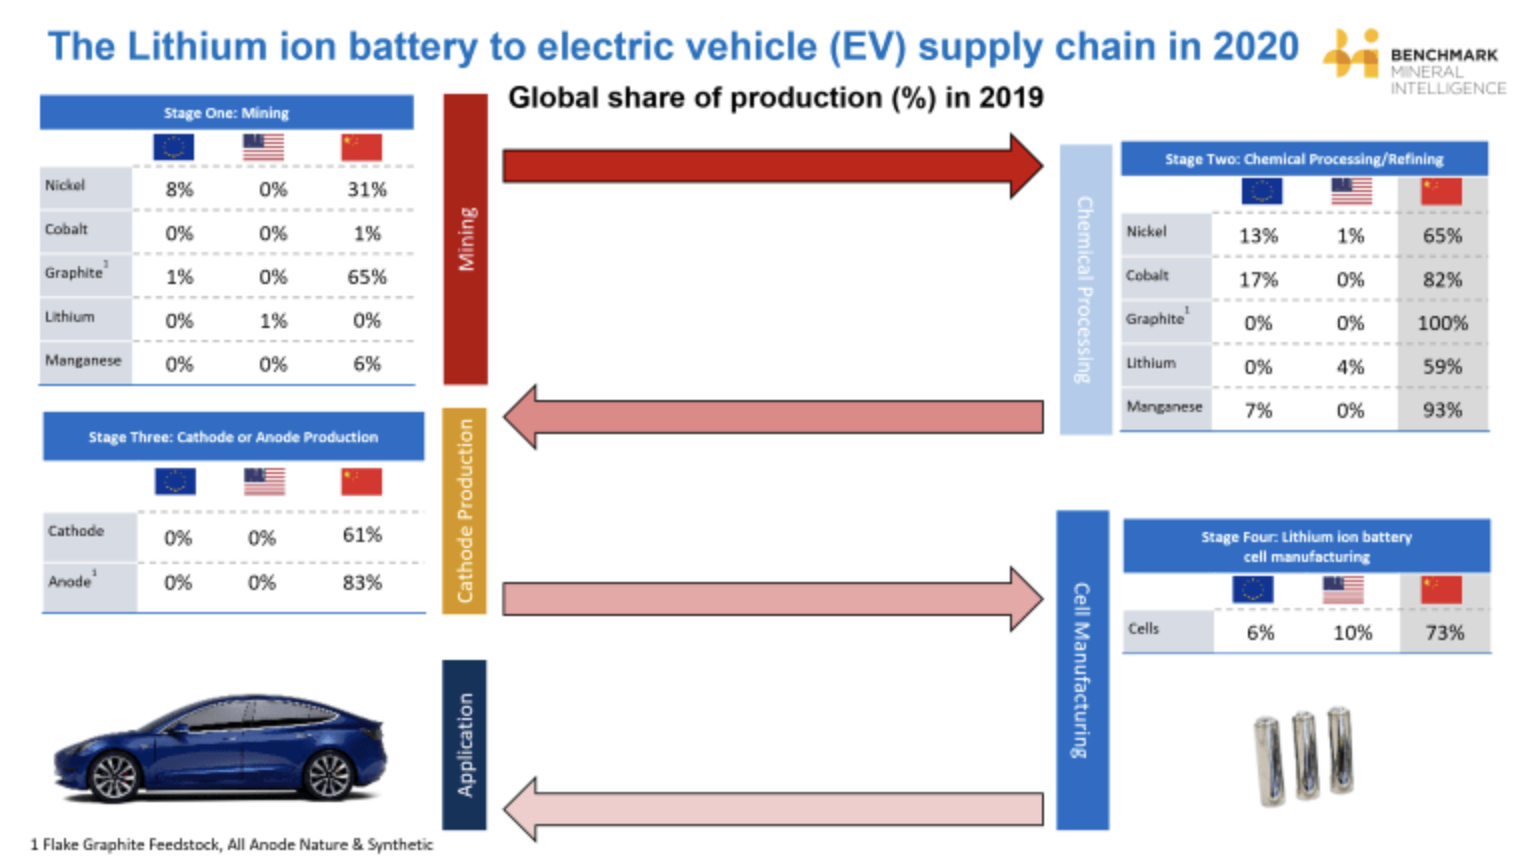 China Dominates the Global Lithium Battery Market - IER